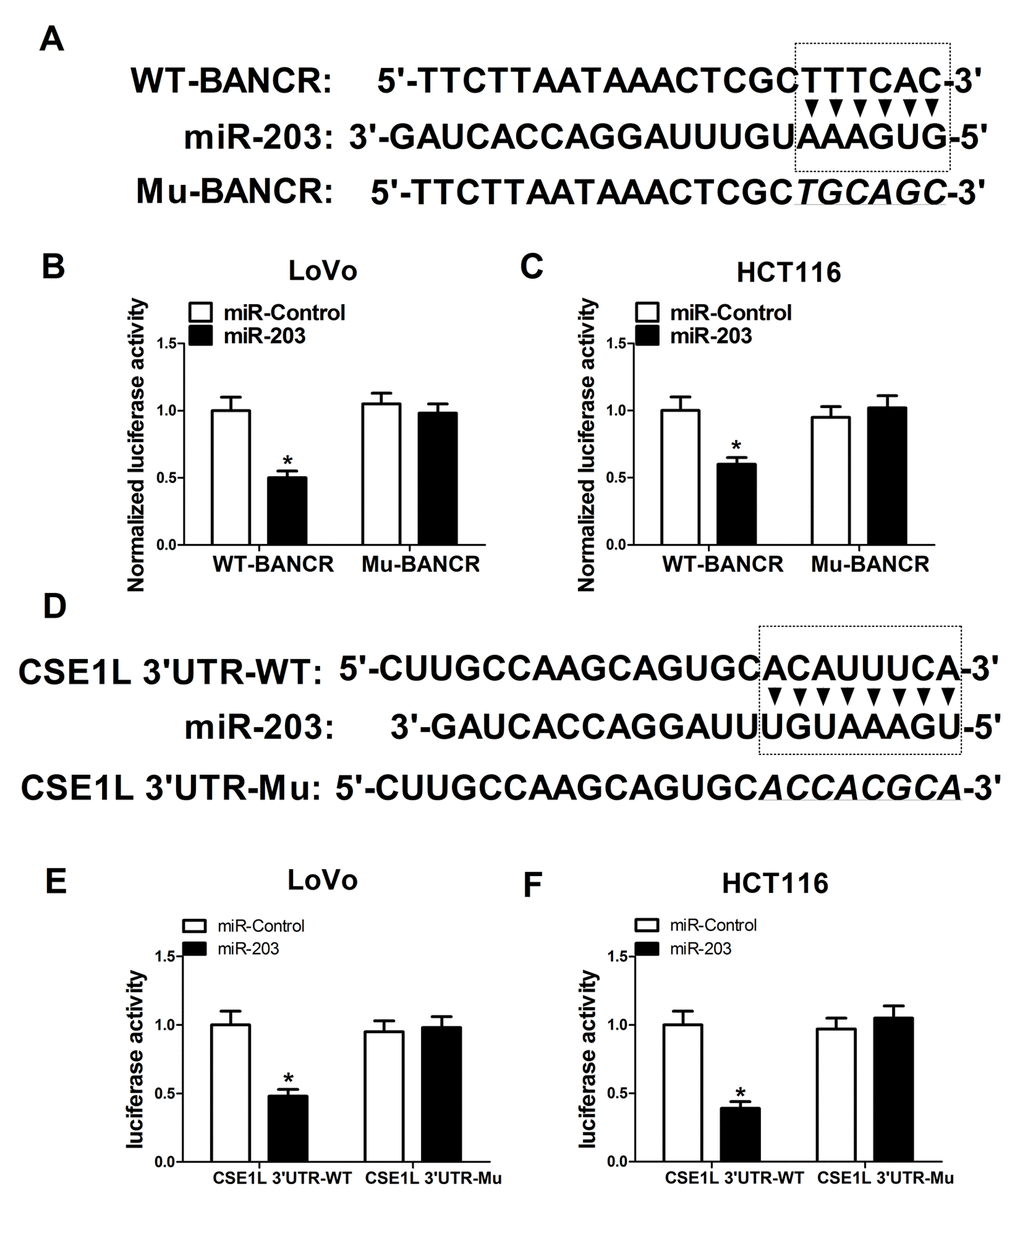 BANCR acted as a molecular sponge of miR-203 to sequester miR-203 away from CSE1L in CRC cells. (A) Predicted binding sites between BANCR and miR-203, and mutant sites in Mu-BANCR reporter. (B and C) The effects of miR-203 overexpression on luciferase activity of WT-BANCR and Mu-BANCR reporters were detected in LoVo and HCT116 cells. (D) Putative binding sequences between miR-203 and CSE1L 3’UTR, and mutant sites in CSE1L 3’UTR-Mu reporter. (E and F) The effects of miR-203 overexpression on luciferase activity of CSE1L 3’UTR-WT and CSE1L 3’UTR-Mu reporters were determination in LoVo and HCT116 cells.